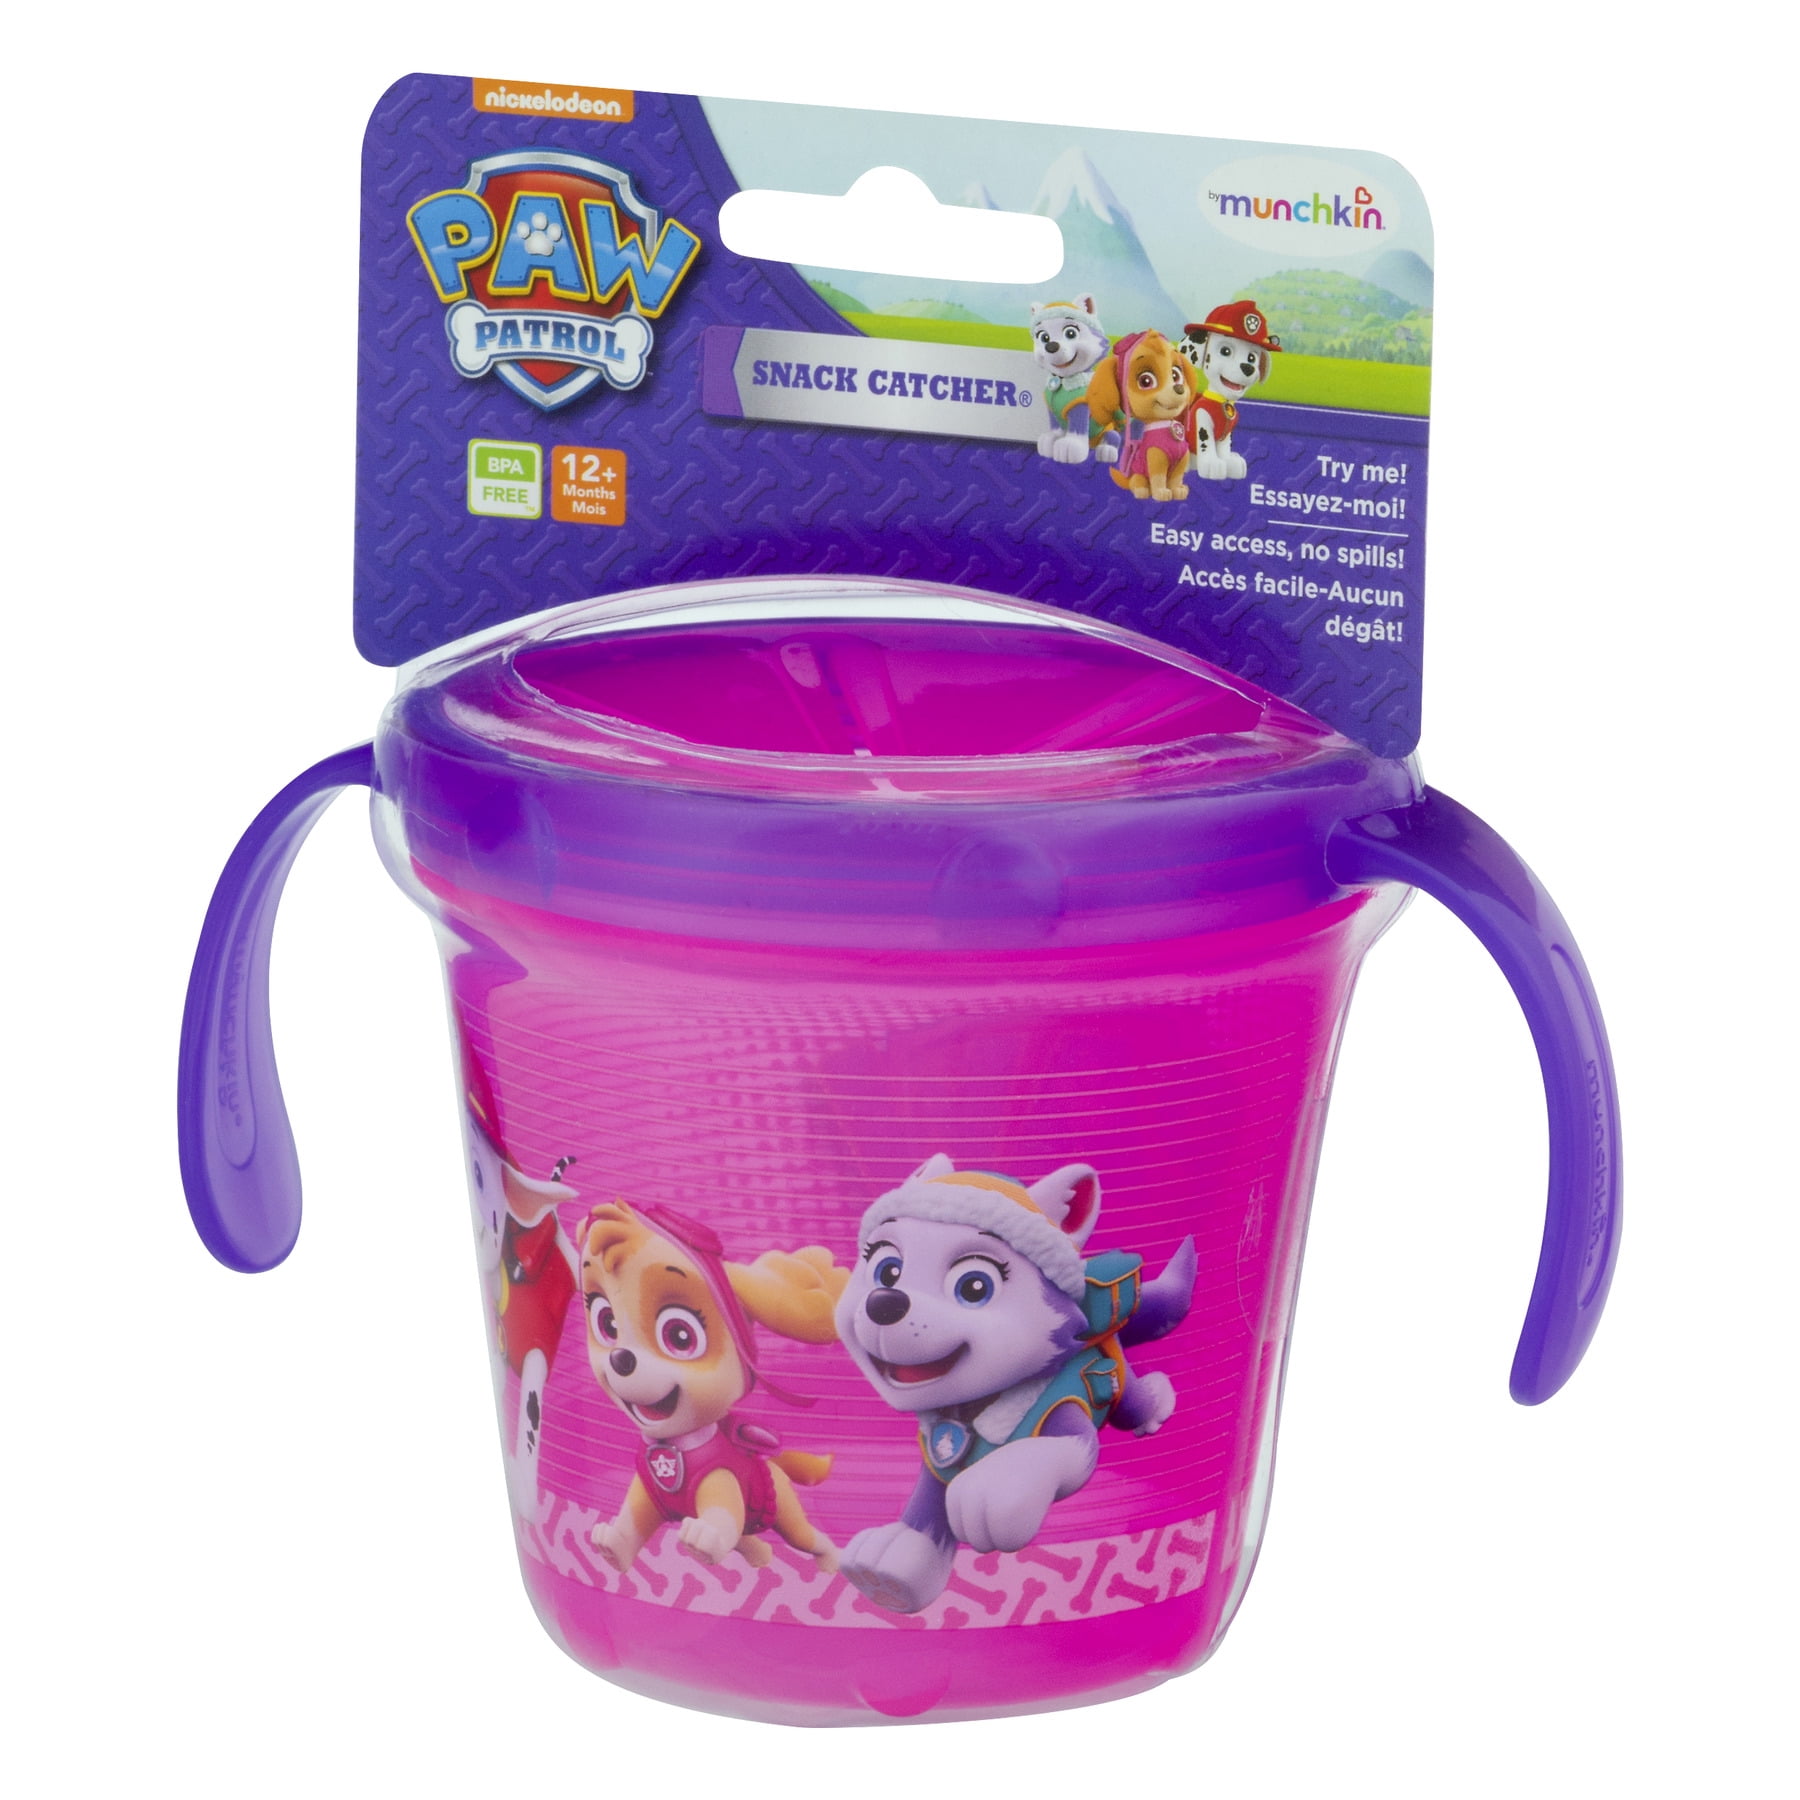 Best Snack Catcher And Drink Cup Wholesale, Kids Snack Container Kean